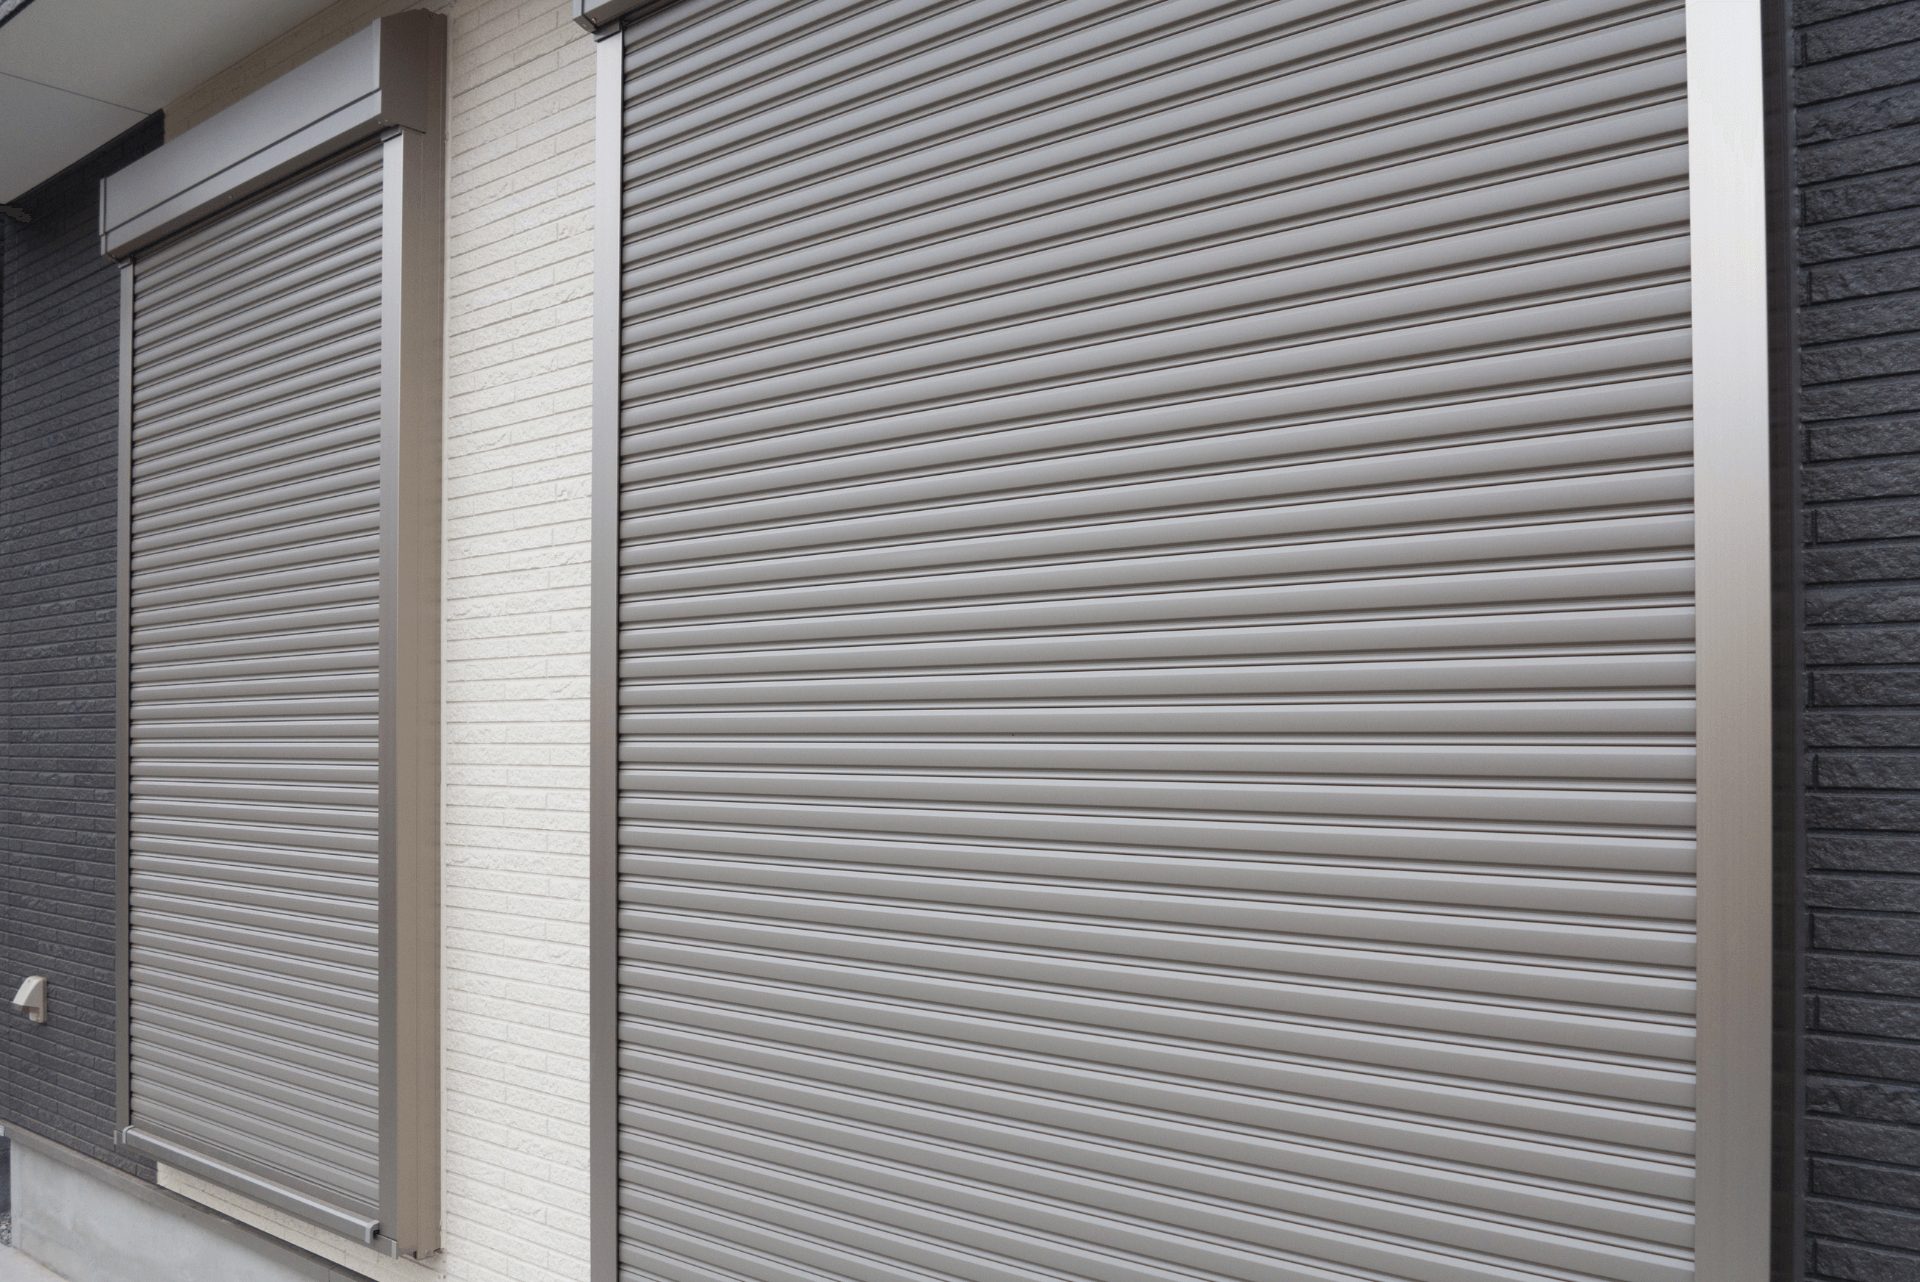 How Secure are Roller Shutters?